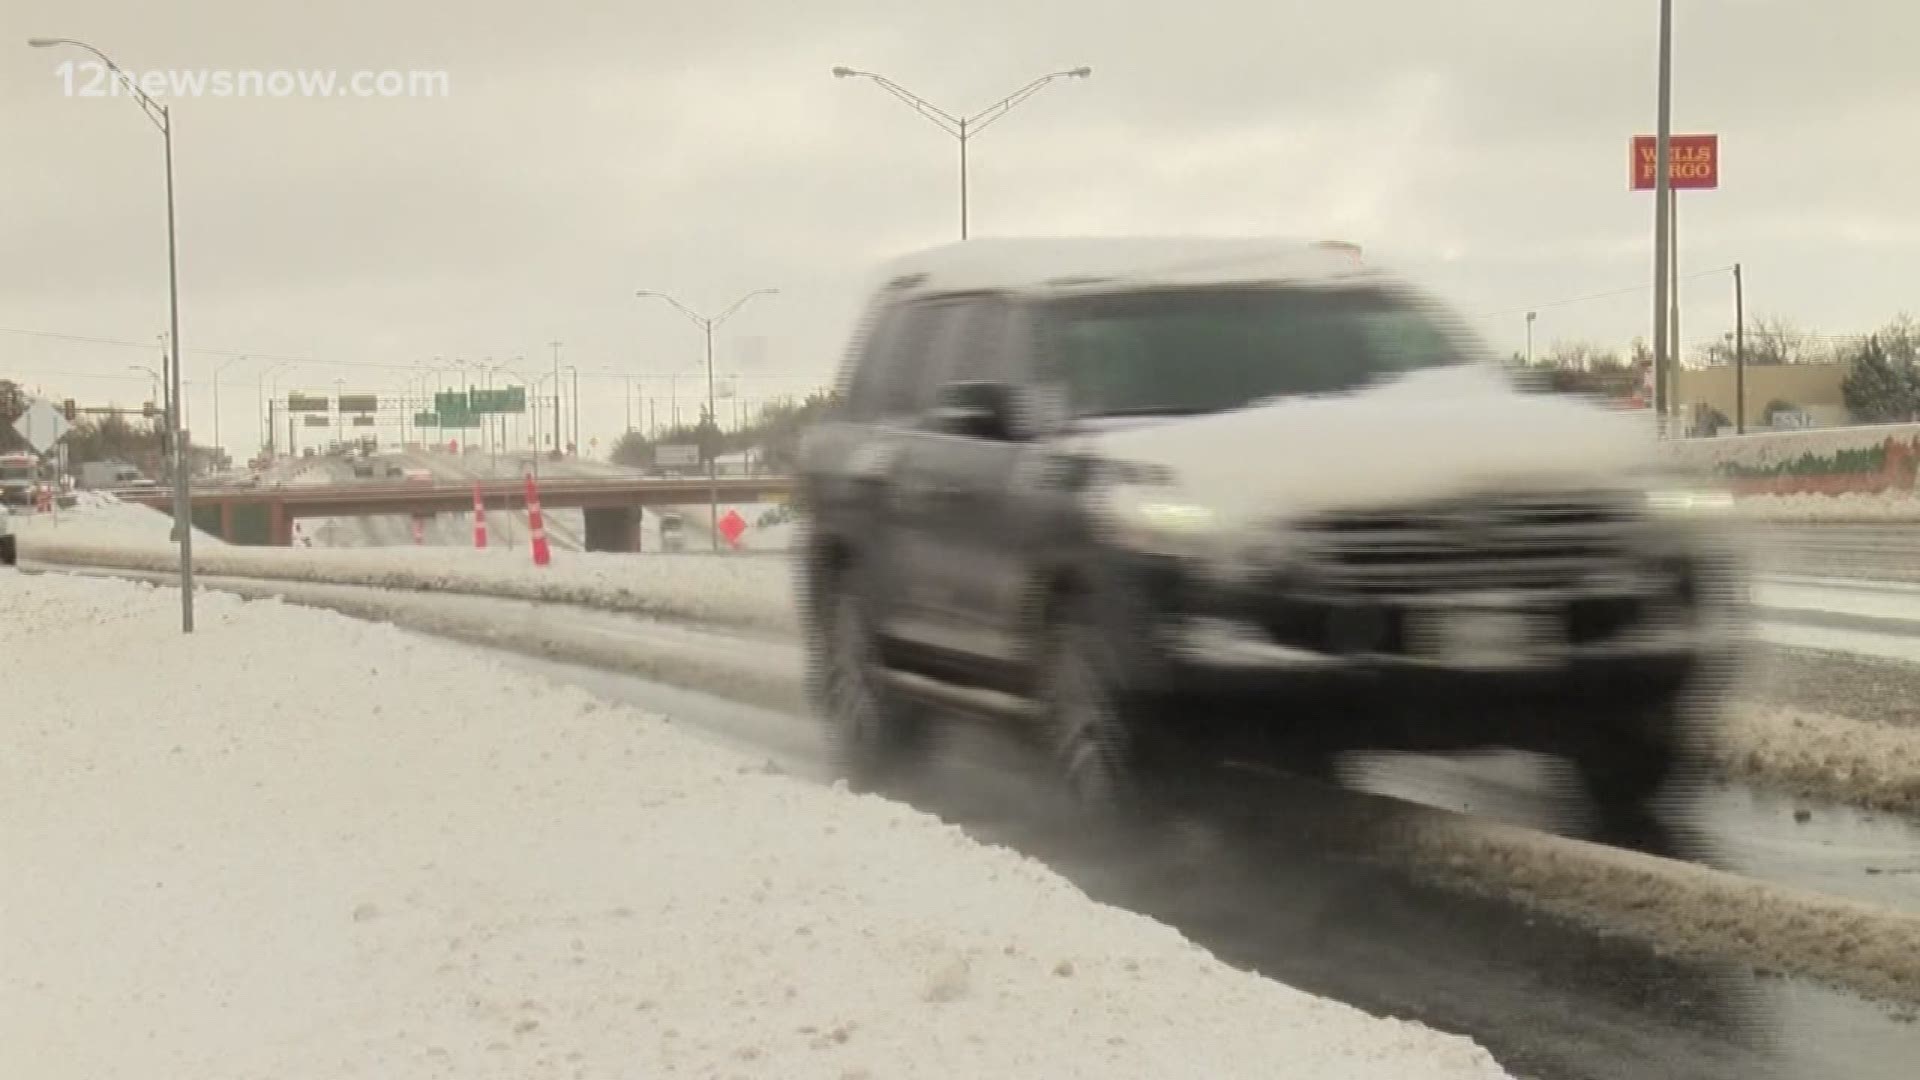 Cold front brings snow to Texas panhandle